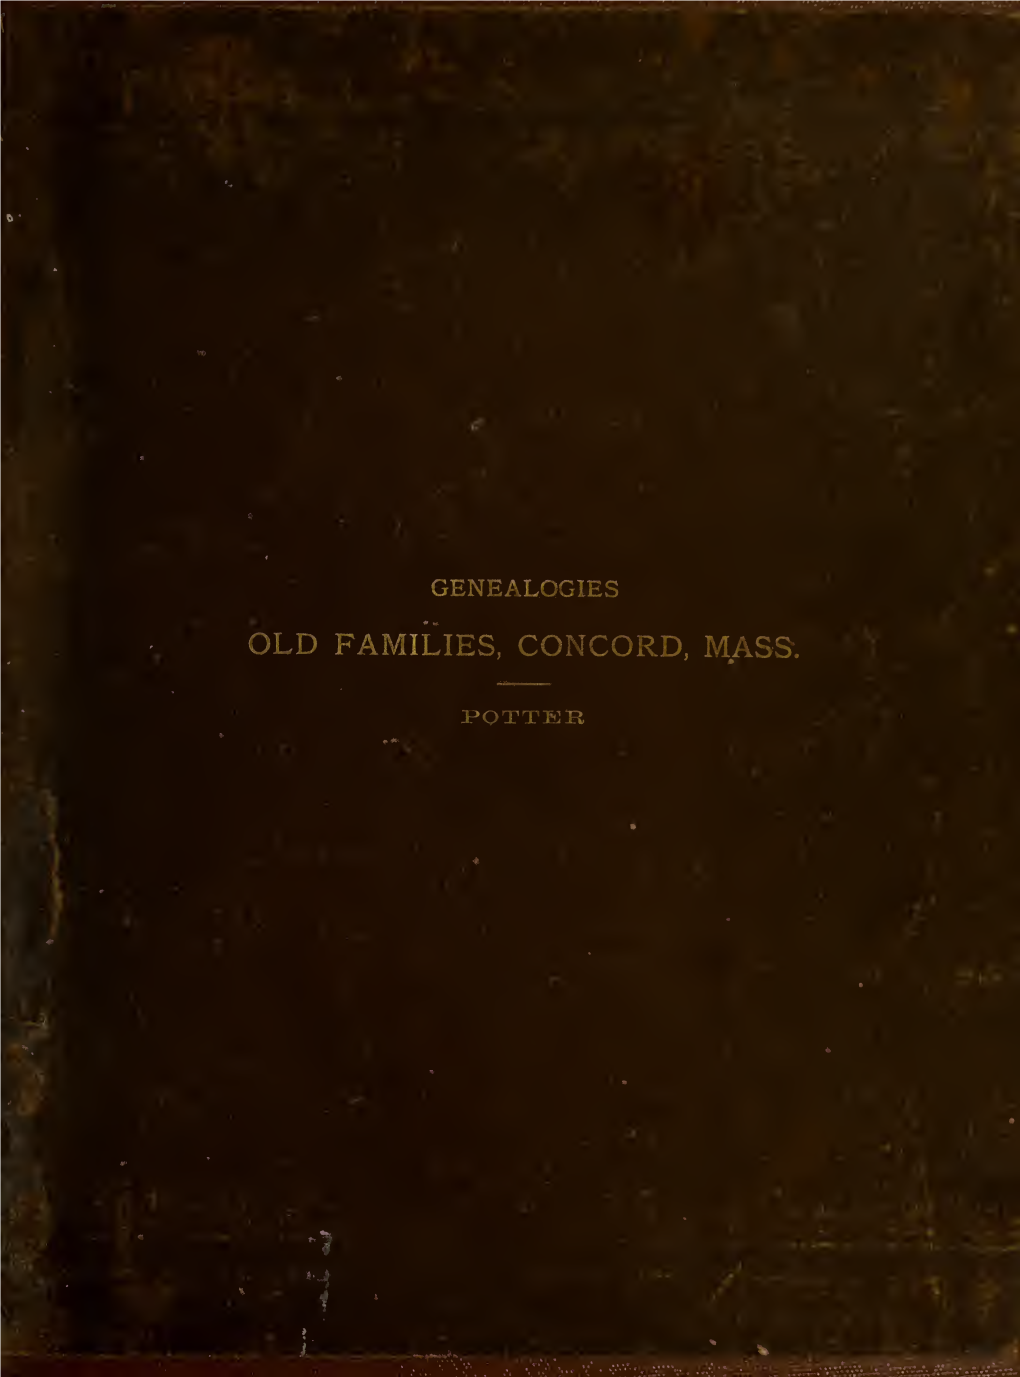 Genealogies of Some Old Families of Concord, Mass. and Their